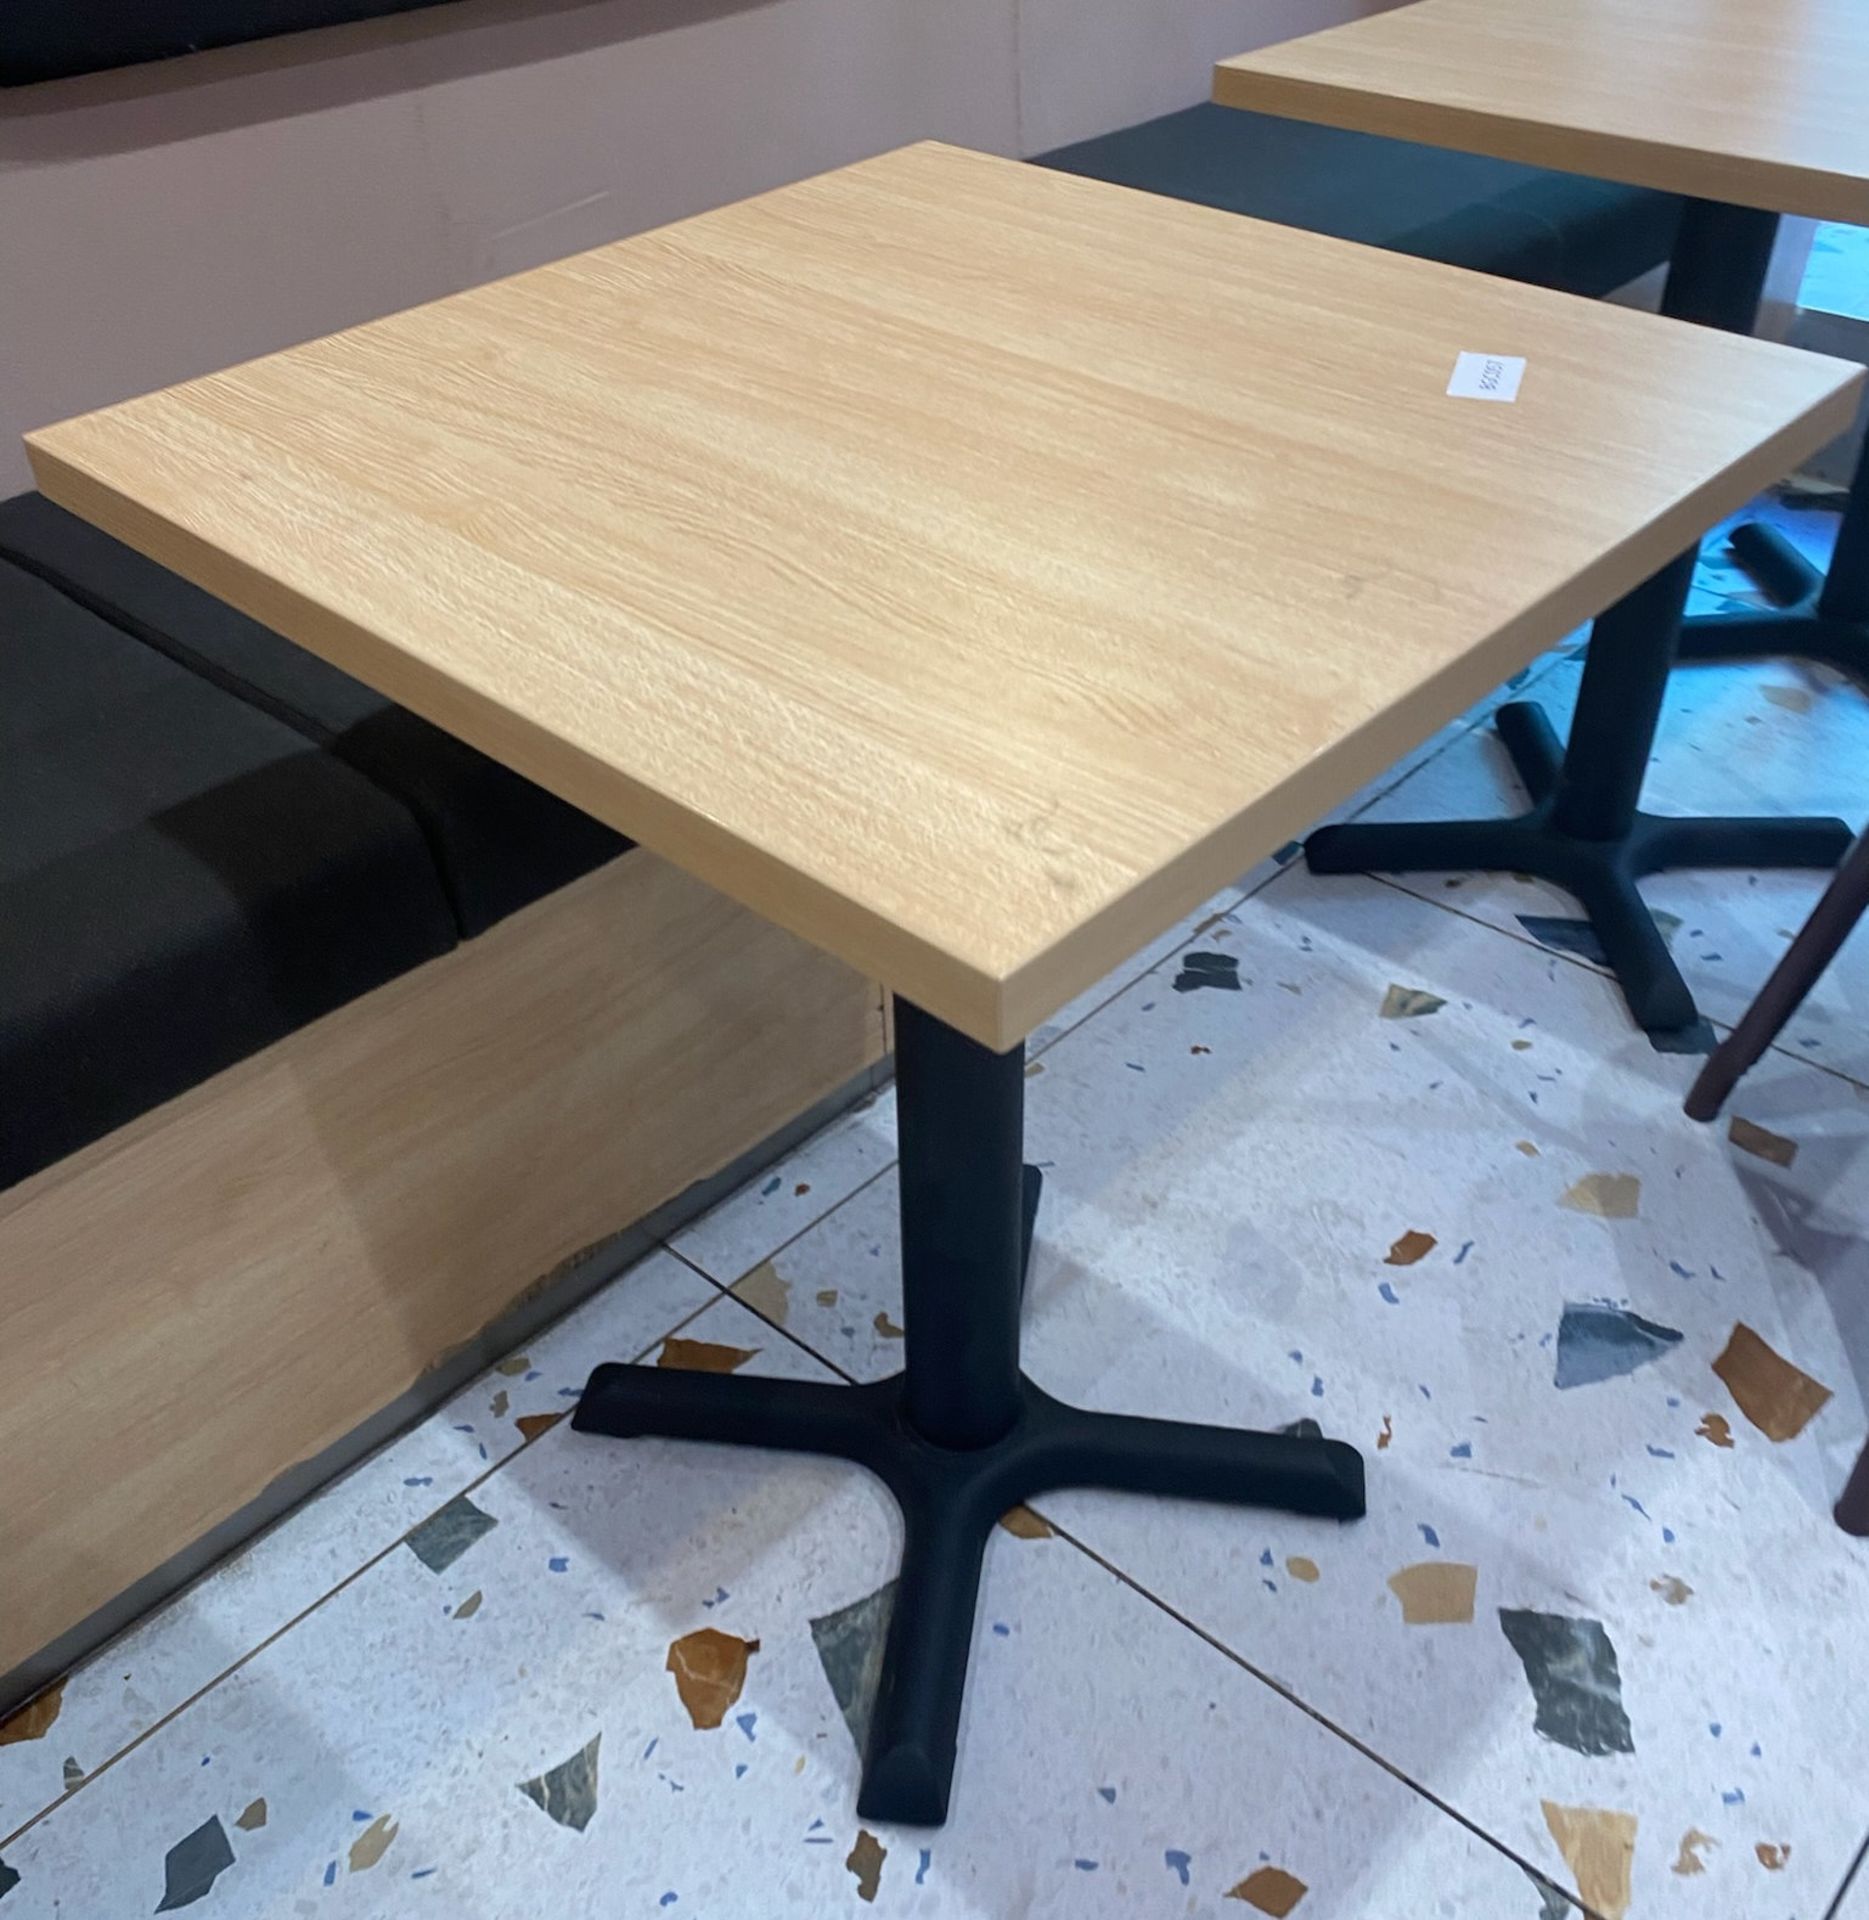 1 x Light Maple Coloured Wooden Top Square Dining Table With Metal Leg - Approx. 600Mm - Ref: BGC058